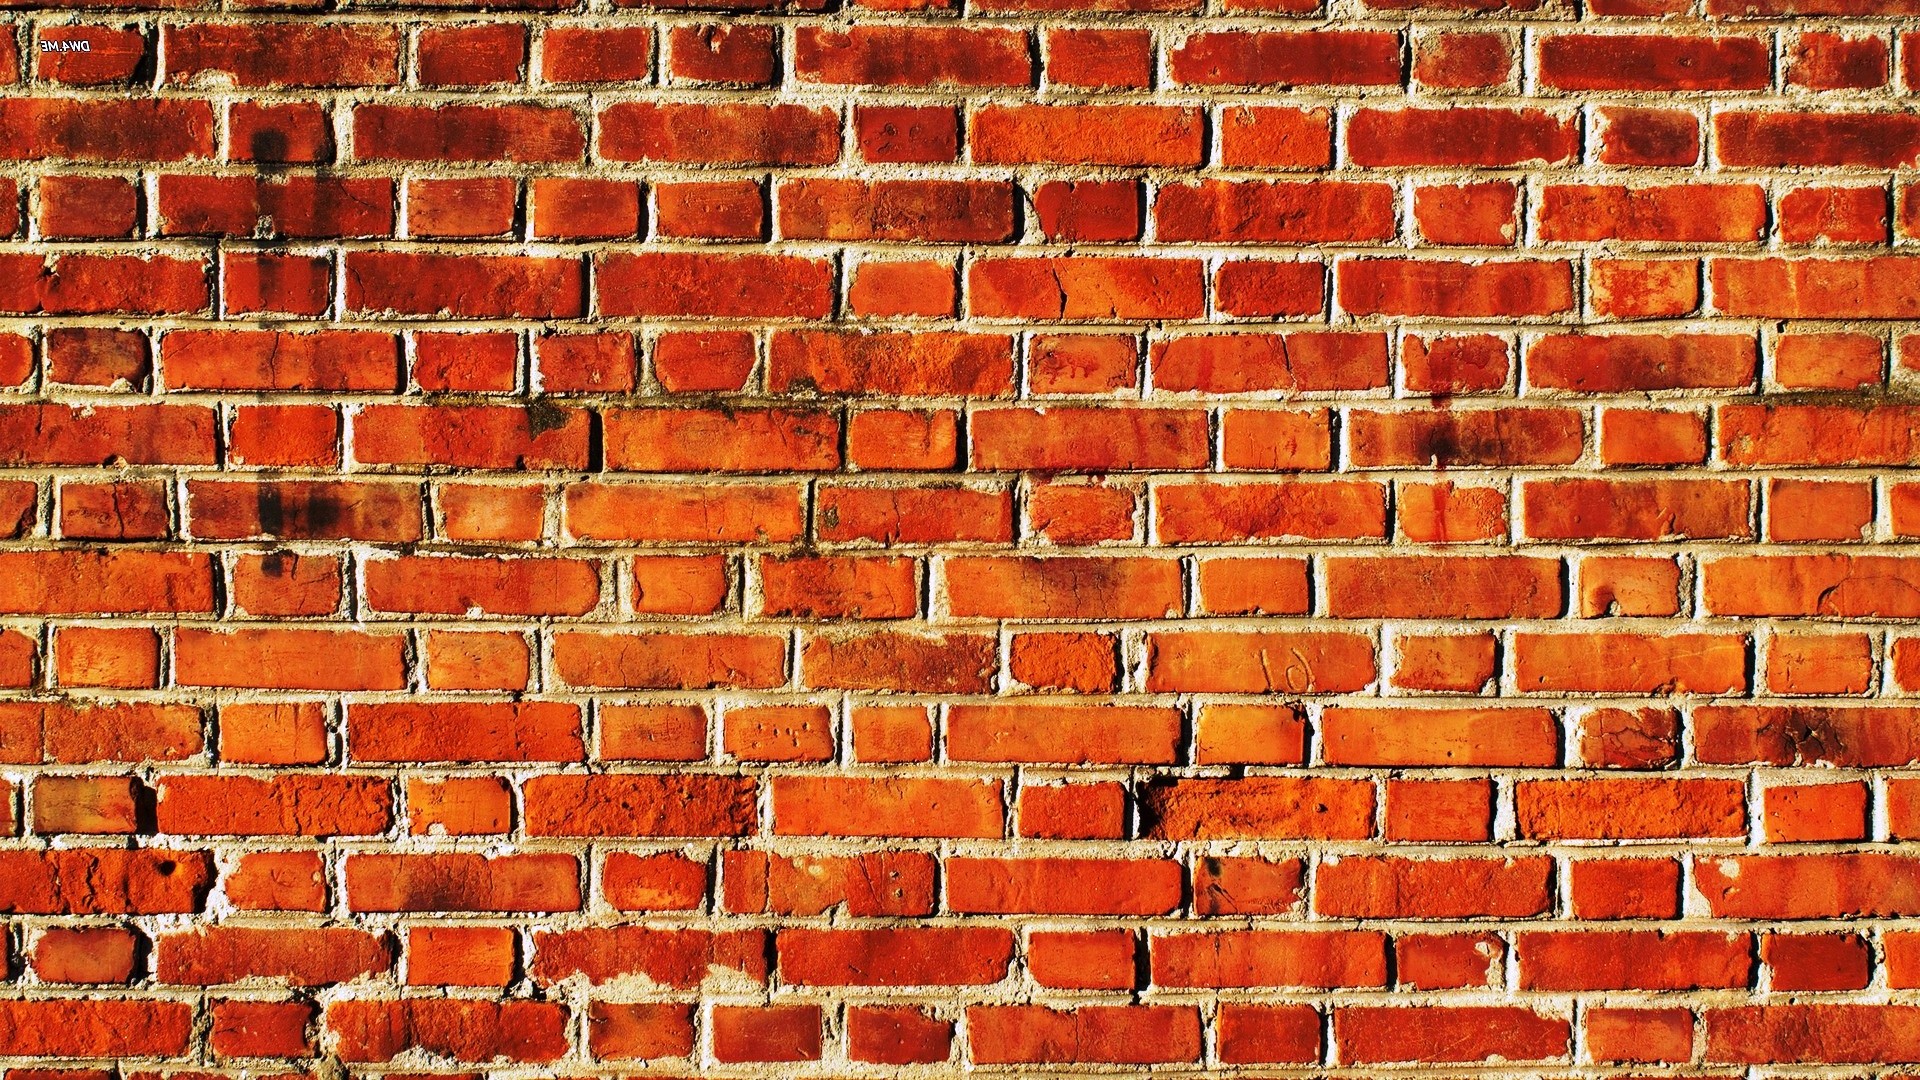 Brick Wallpaper HD Computer with high-resolution 1920x1080 pixel. You can use and set as wallpaper for Notebook Screensavers, Mac Wallpapers, Mobile Home Screen, iPhone or Android Phones Lock Screen